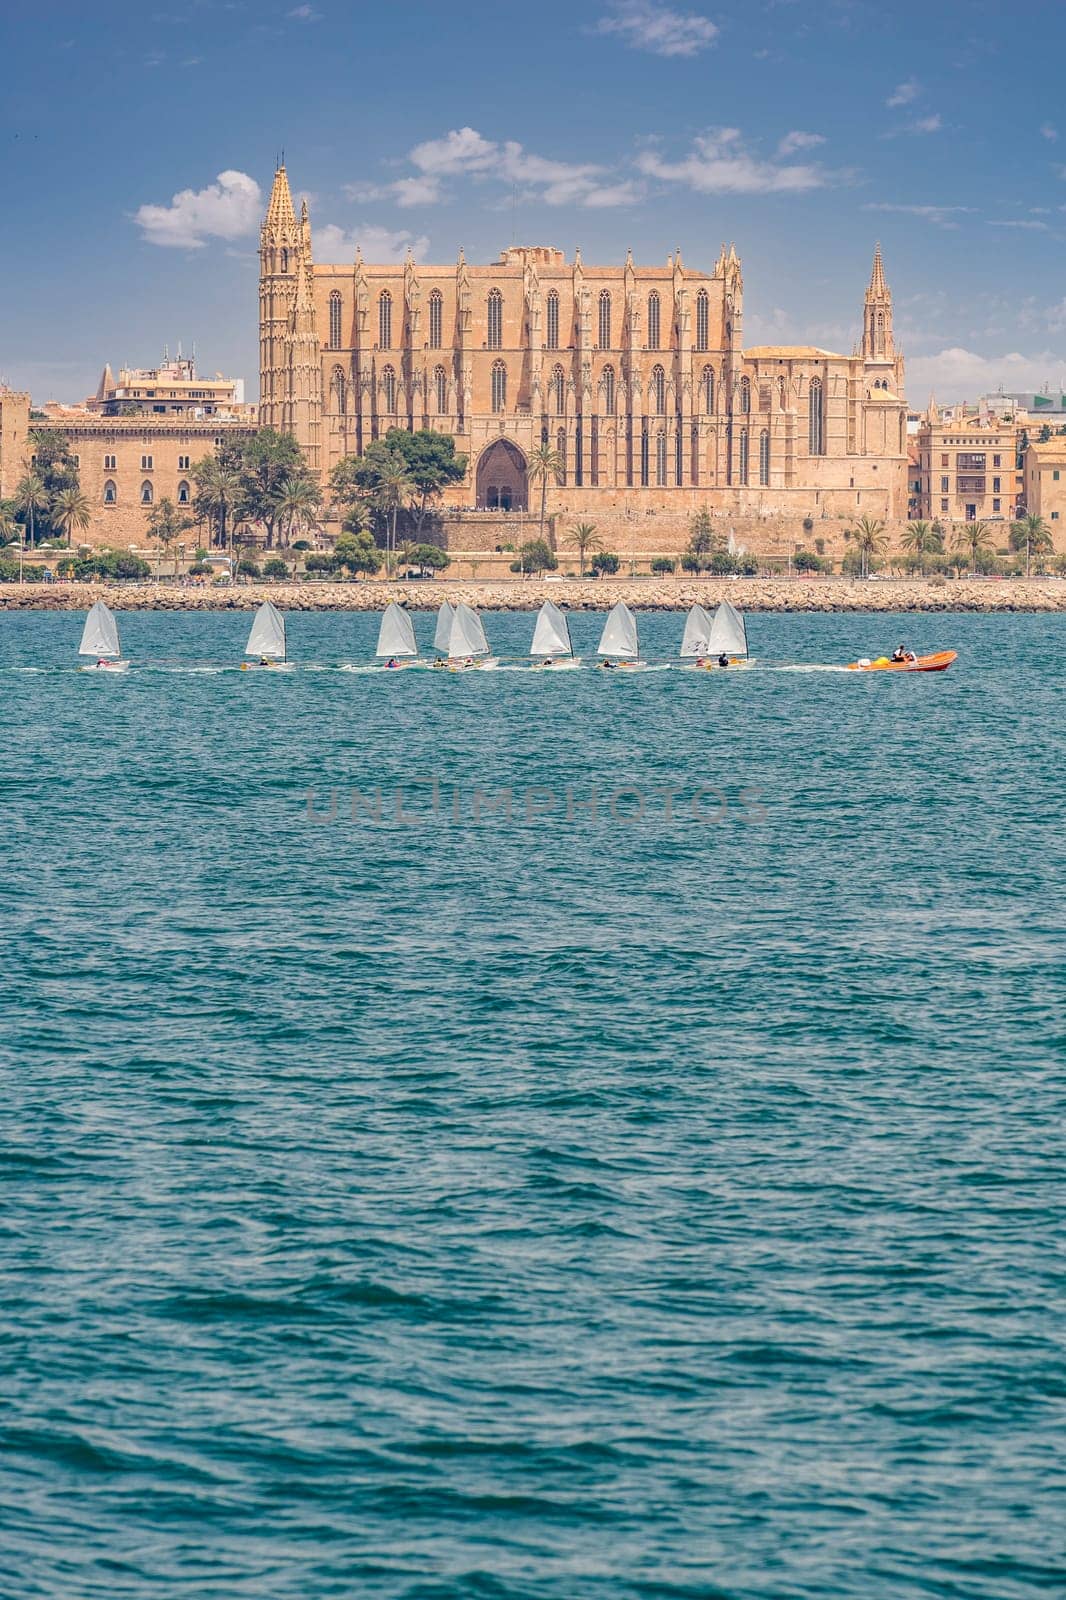 Majestic Majorca Cathedral Overlooking a Regatta of Sailing Dinghies on Azure Waters by Juanjo39